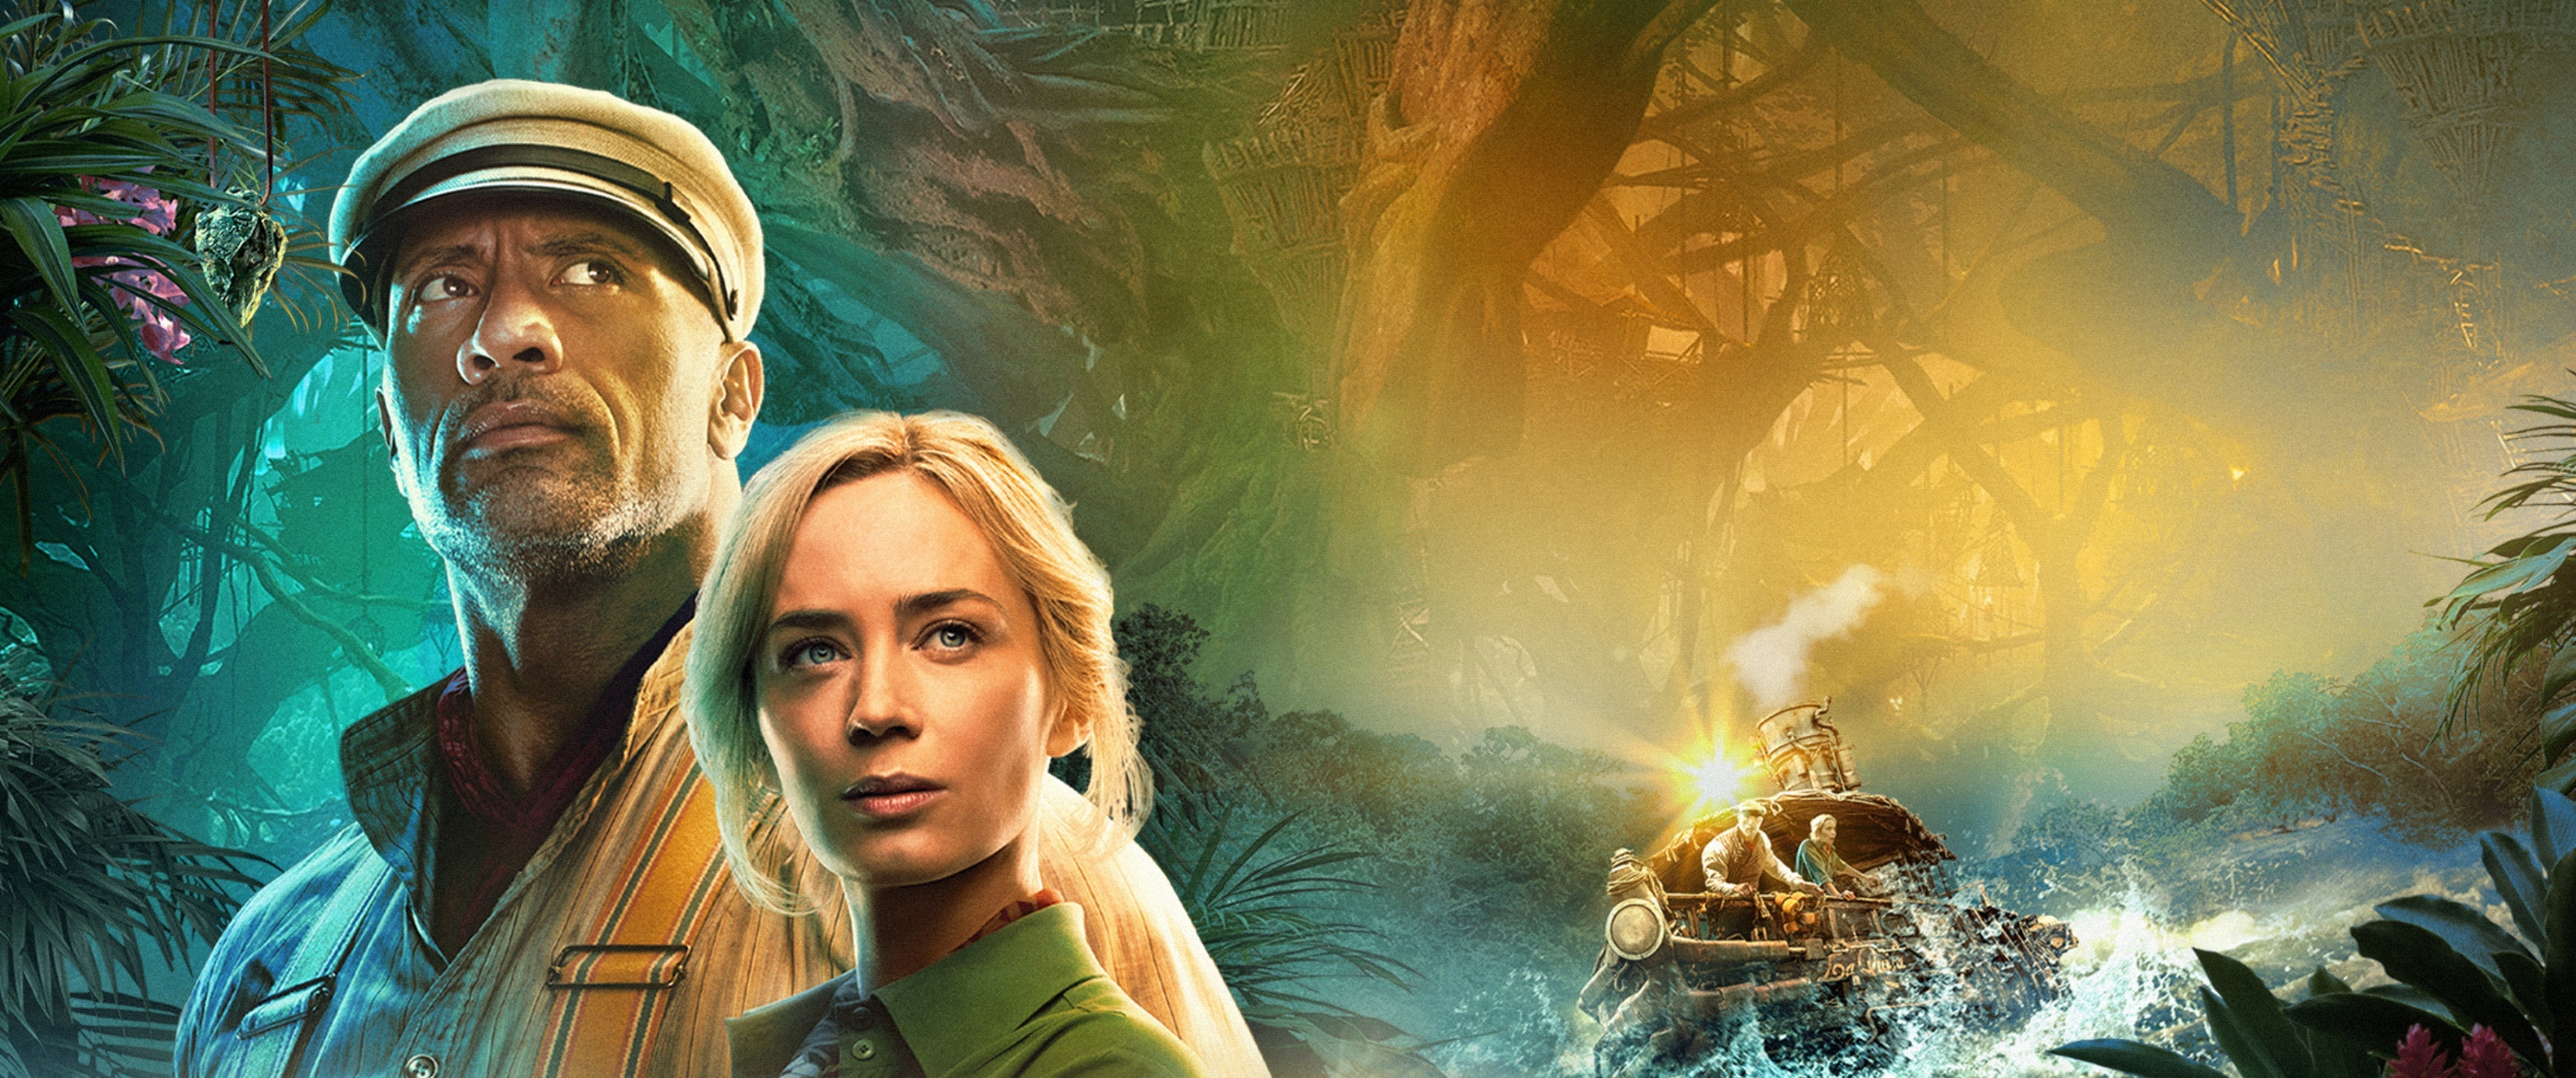 Jungle Cruise wallpaper 4k, Dwayne Johnson and Emily Blunt, Exciting summer release, Action-packed adventure, 3440x1440 Dual Screen Desktop